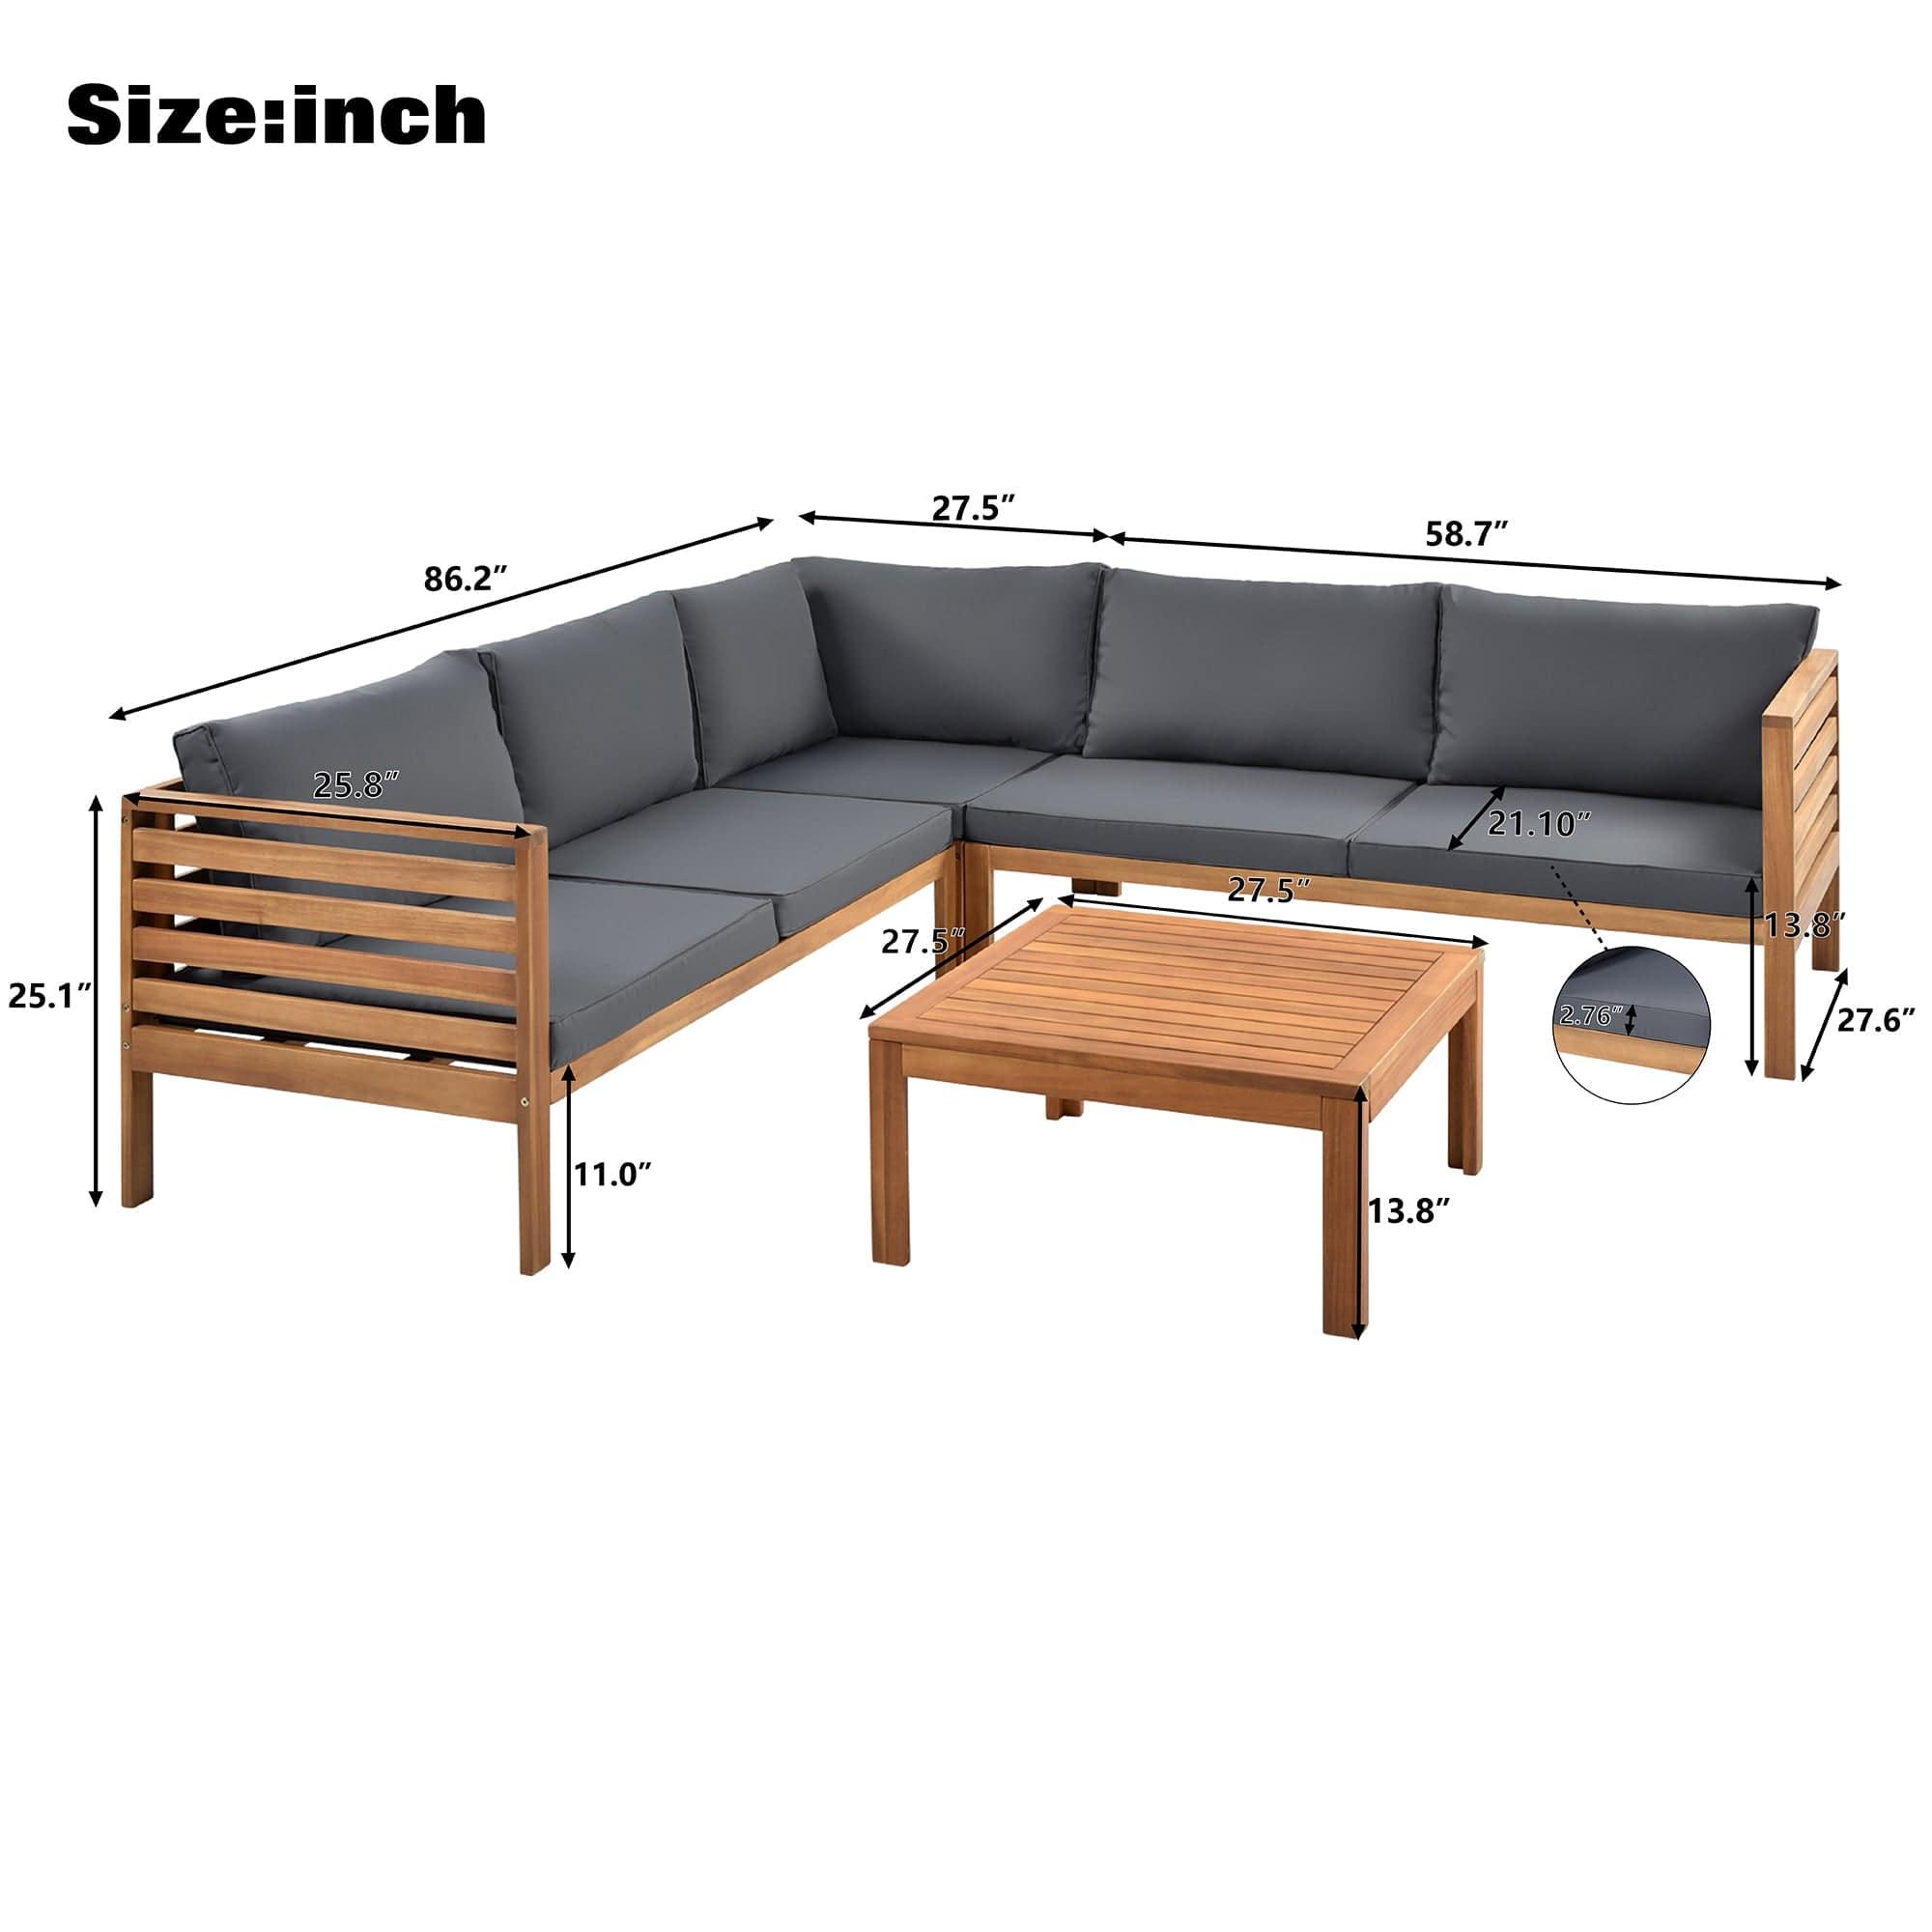 Shop GO Wood Structure Outdoor Sofa Set with gray Cushions Exotic design Water-resistant and UV Protected texture Two-person Sofa One Corner Sofa plus One Coffee Table Strong Metal Accessories Mademoiselle Home Decor